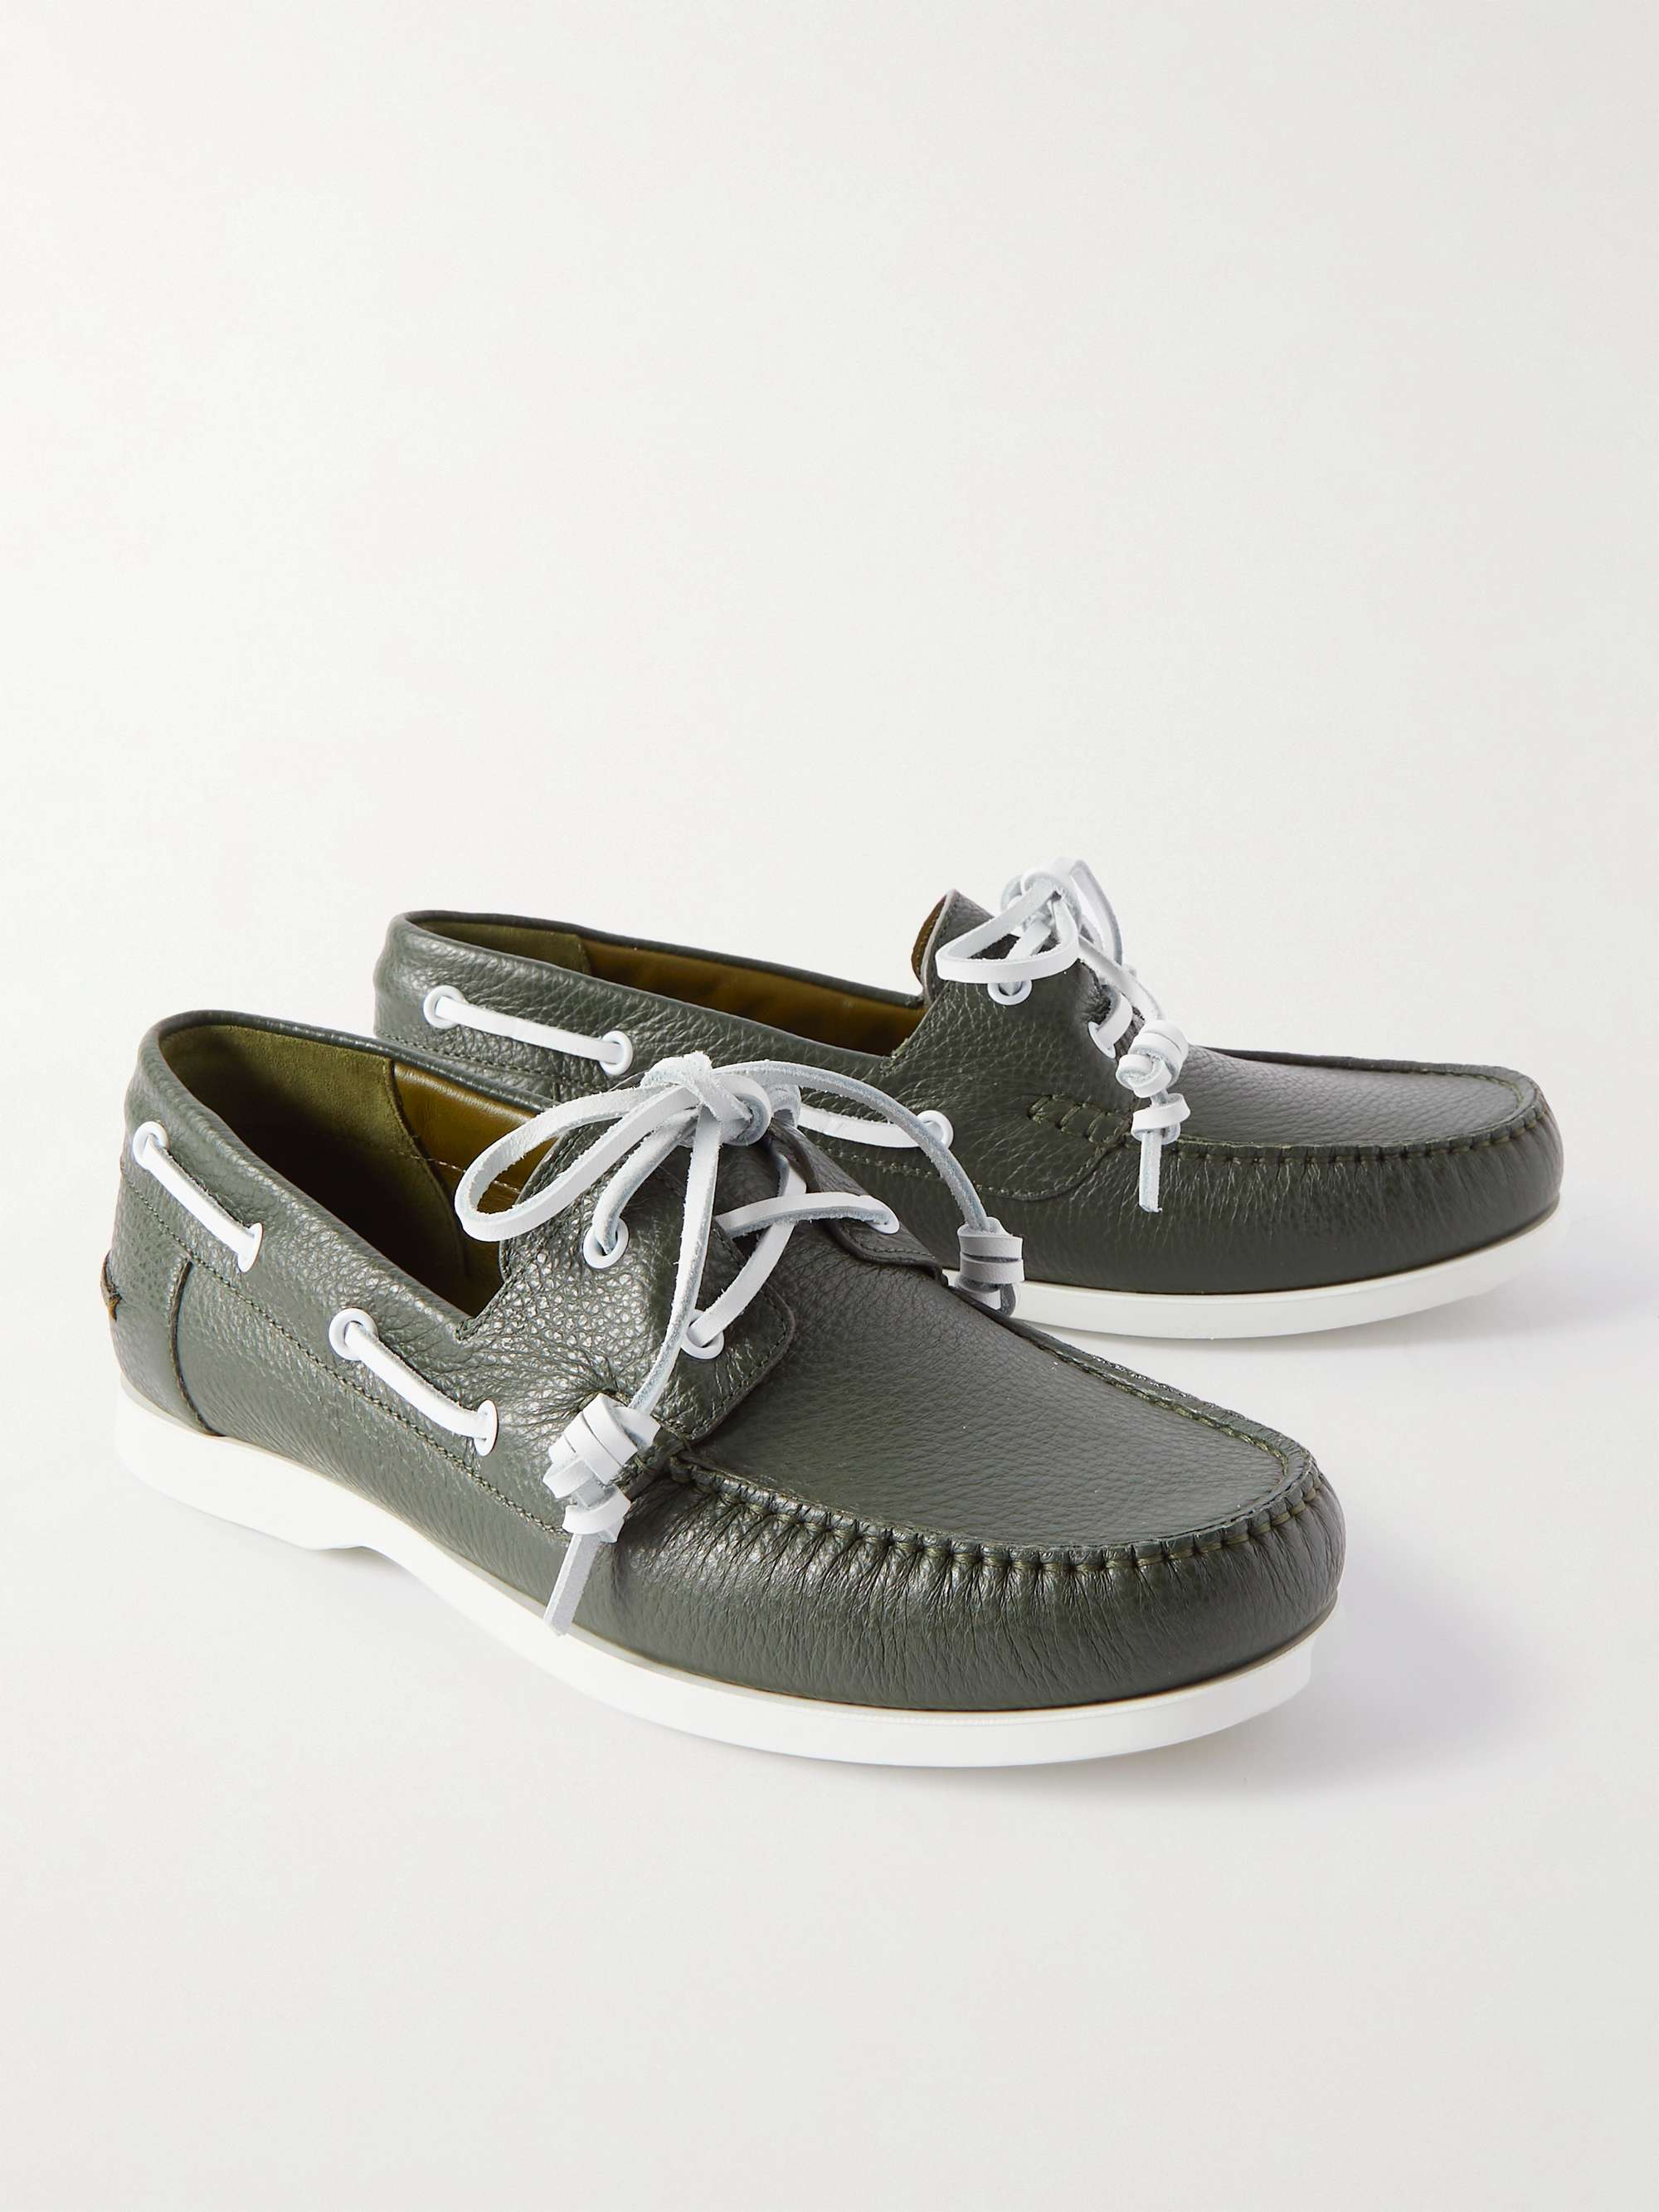 MANOLO BLAHNIK Sidmouth Full-Grain Leather Boat Shoes